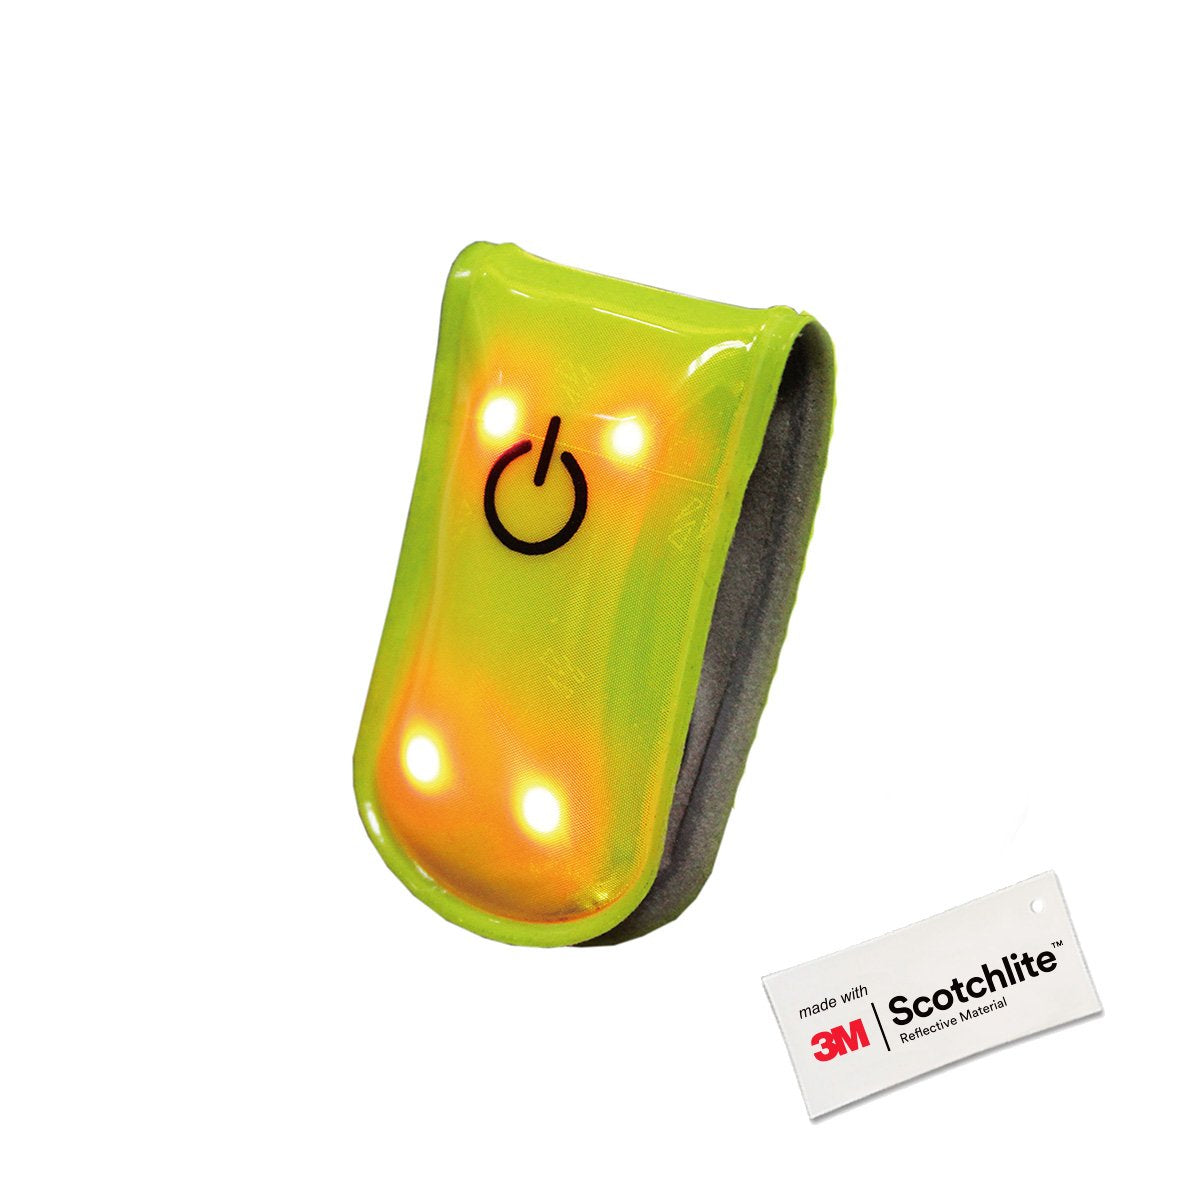 LED Safety Light Battery Operated Warning Light Clip On Portable